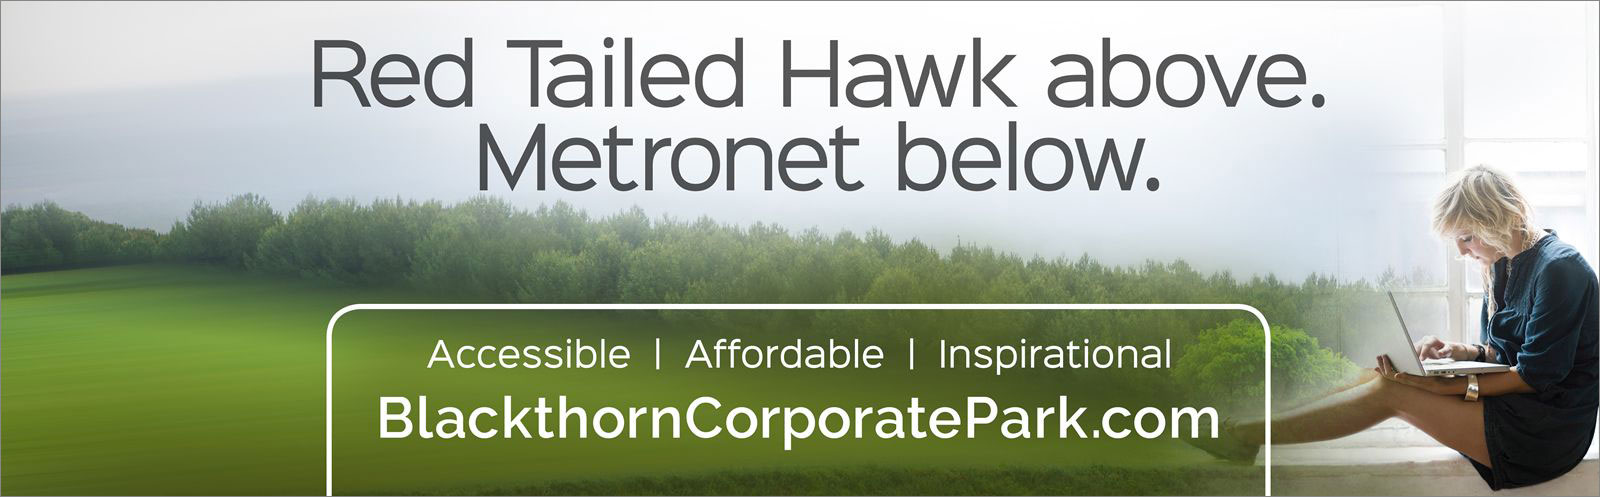 Blackthorn Corporate Park <strong>Outdoor Campaign</strong>